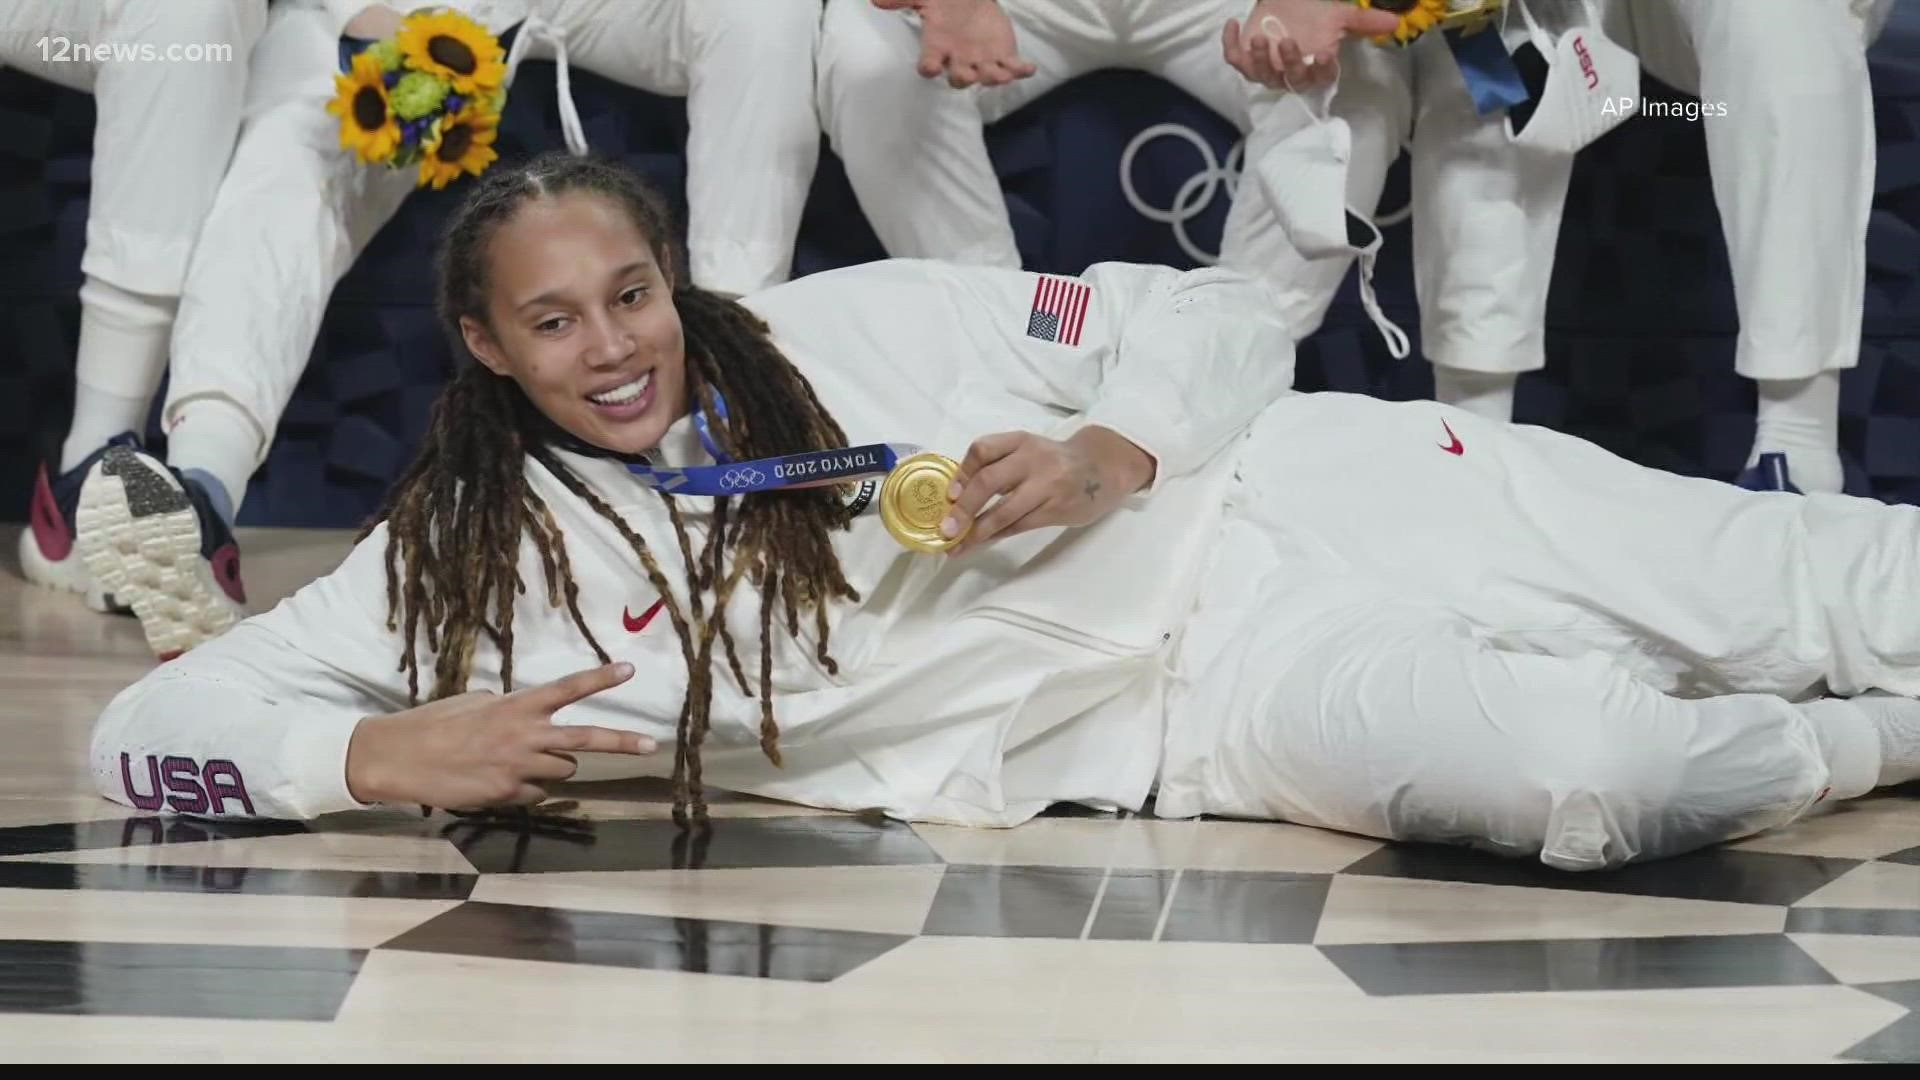 Brittney Griner remains locked in a Russian jail, accused of smuggling cannabis vape cartridges. Her team plans to take part in a charity drive launched by Griner.